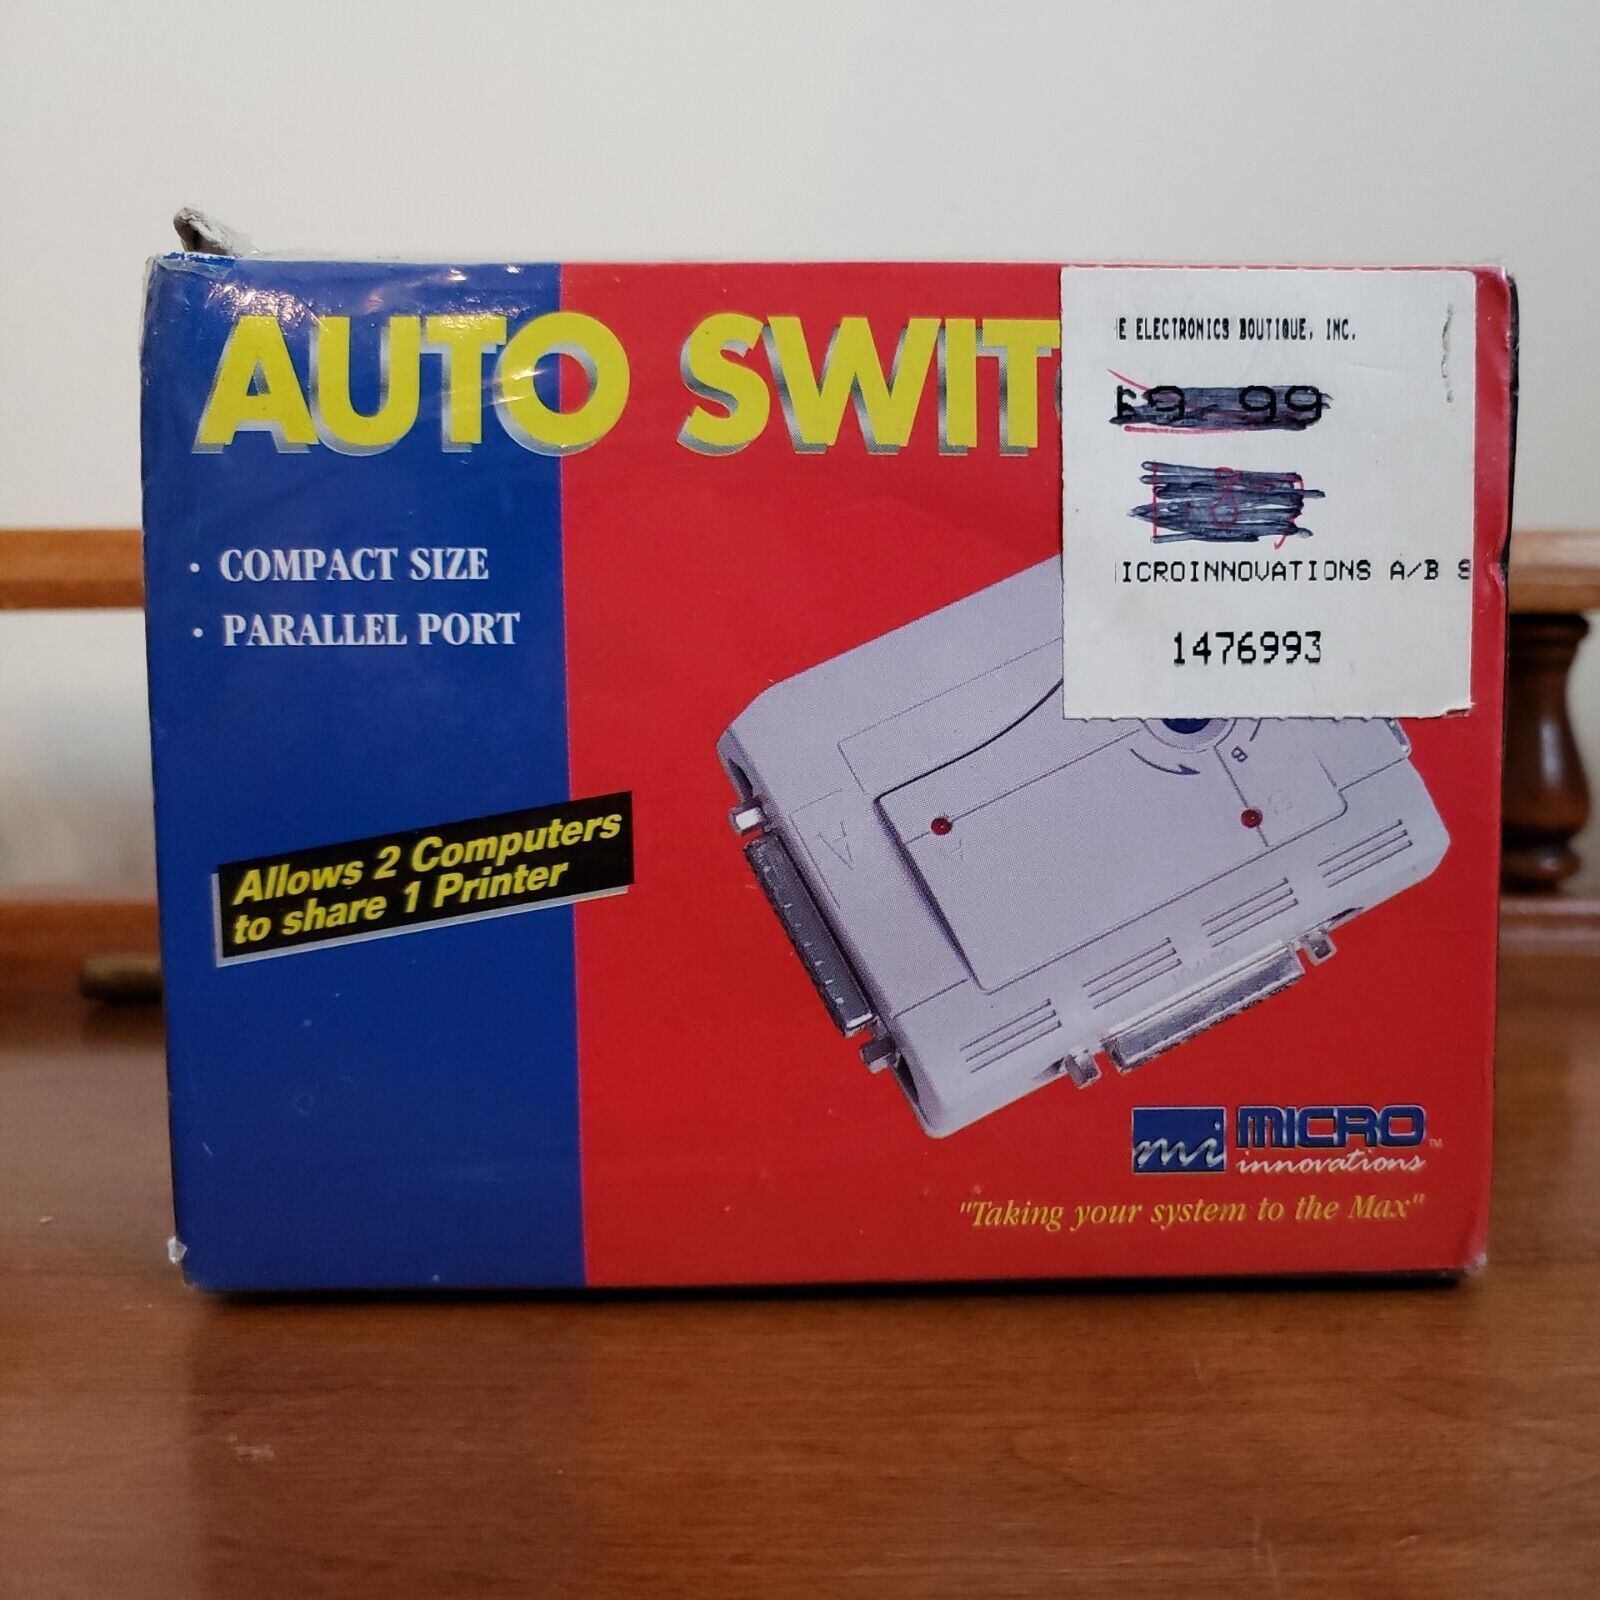 VINTAGE AUTOSWITCH PARALLEL PORT COMPACT  1996 MICRO INNOVATIONS SHARE PRINTERS